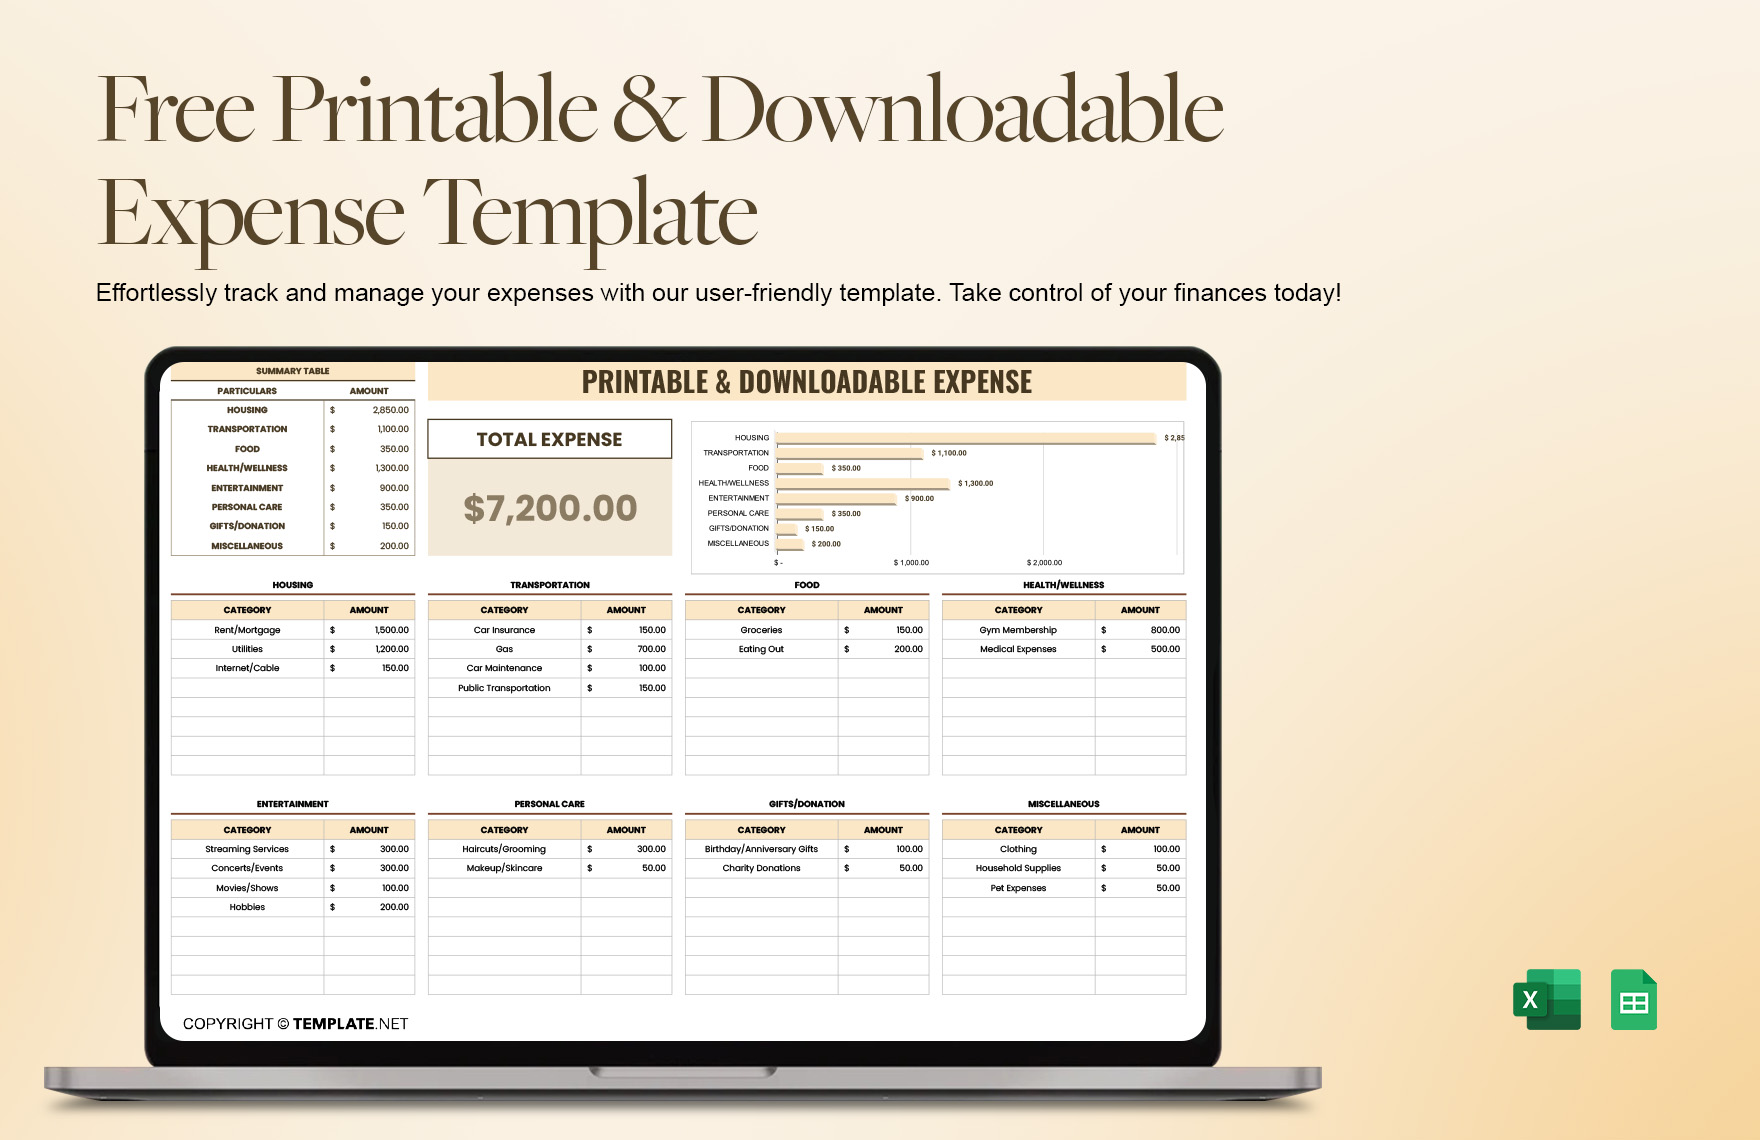 Free Printable & Downloadable Expense Template